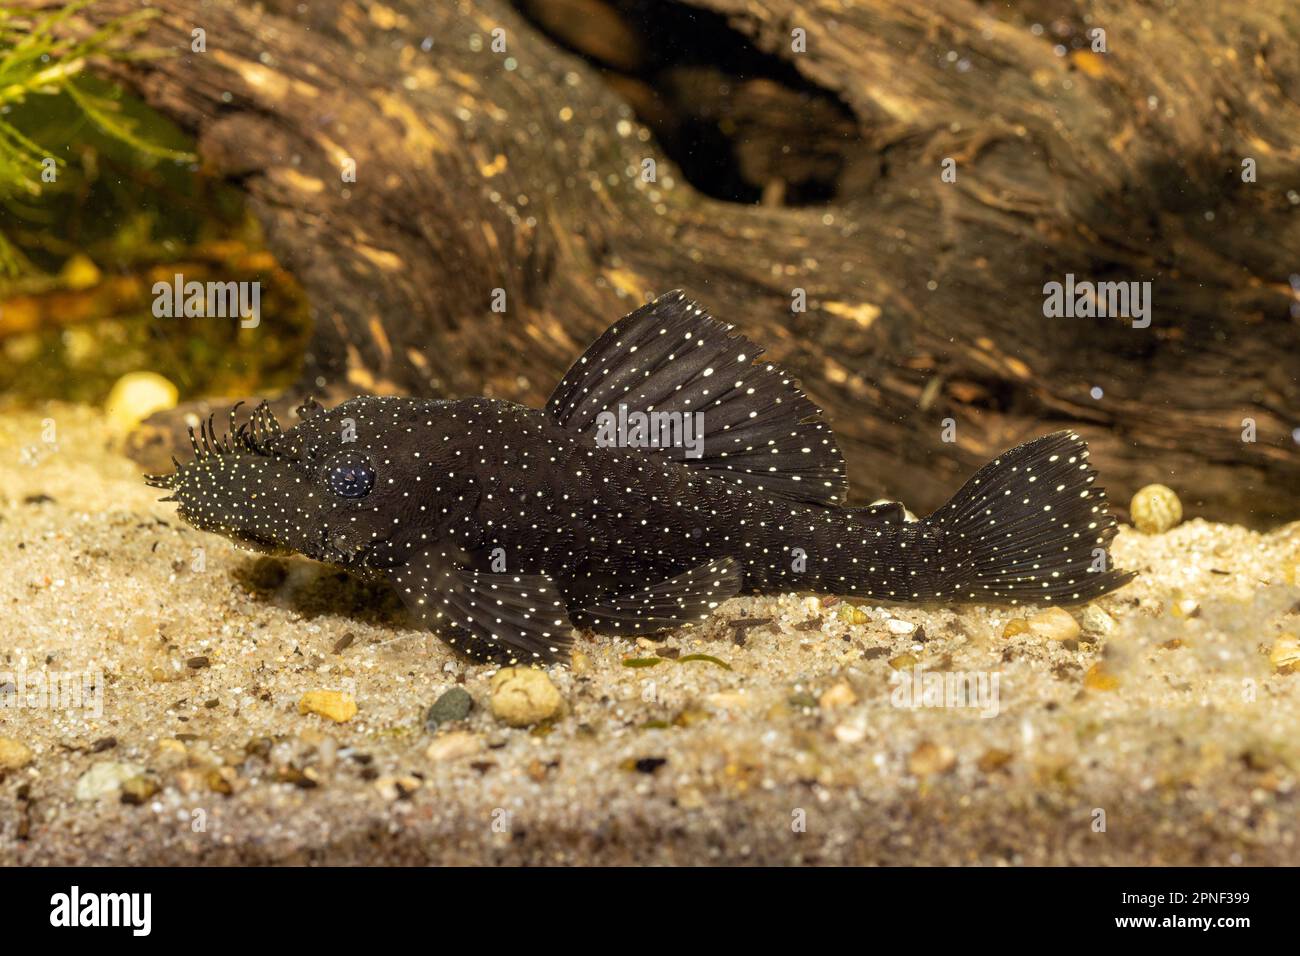 Snowflake bristlenose, Spotted bristle-nosed catfish (Ancistrus hoplogenys), L181, side view Stock Photo